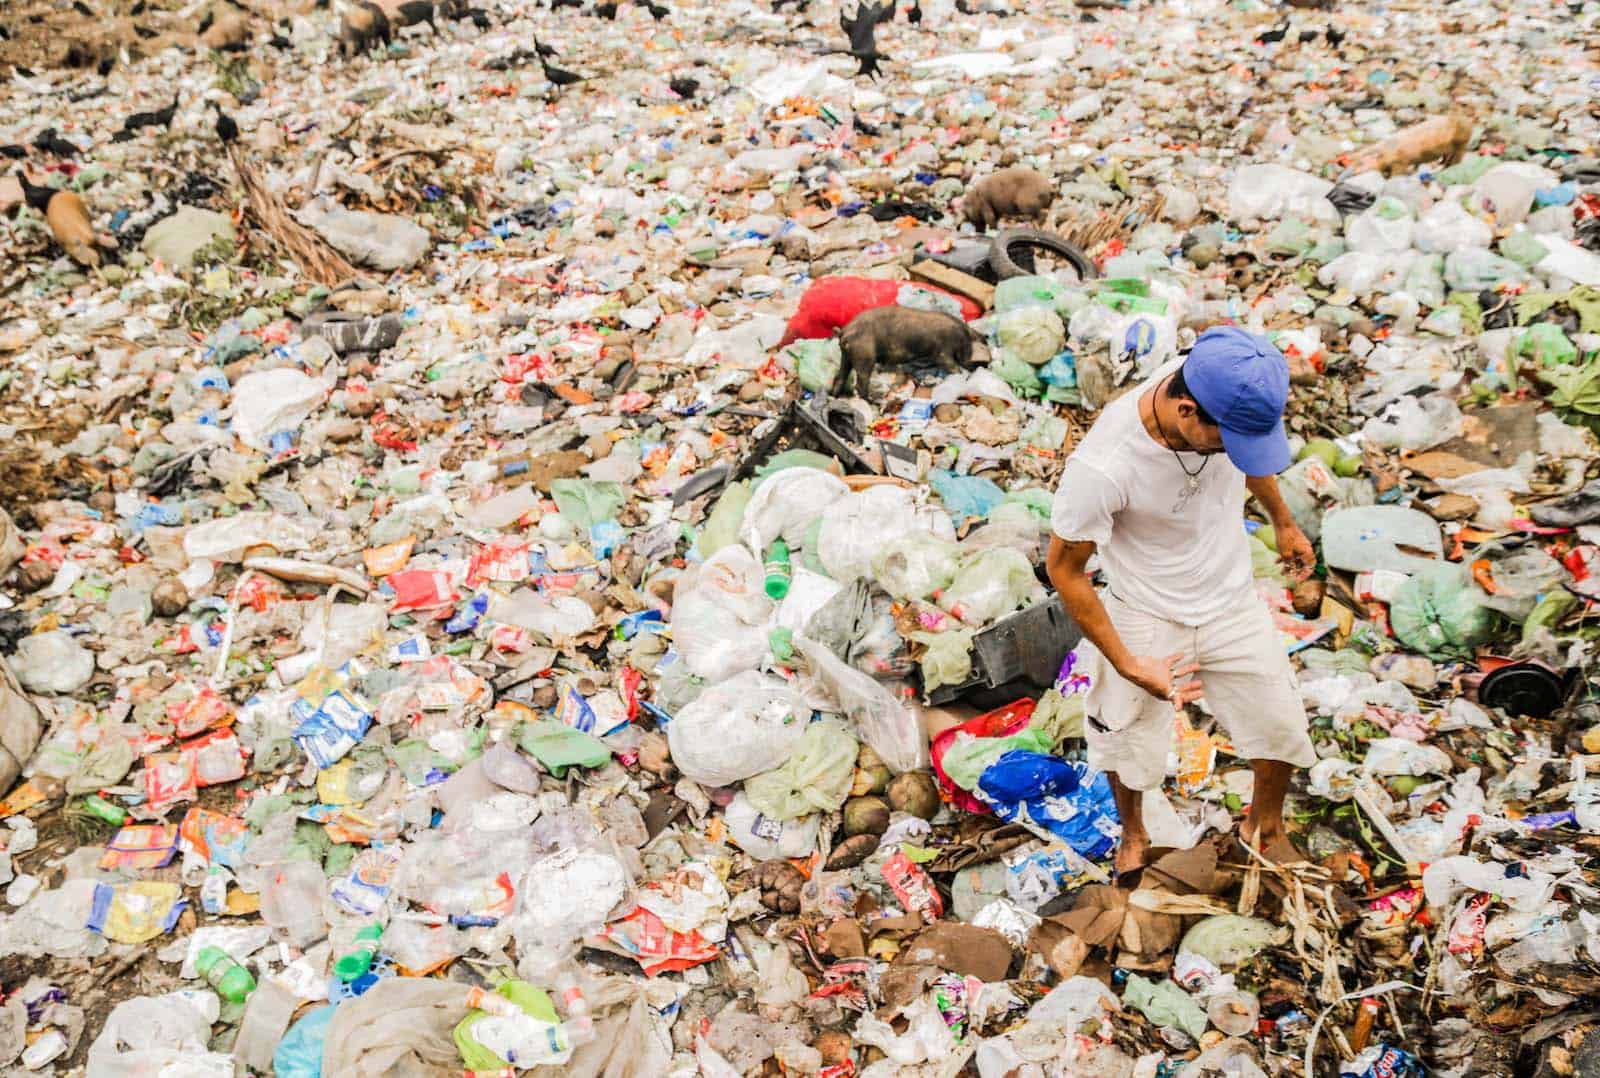 A man stands in a large pile of trash, looking for plastic.